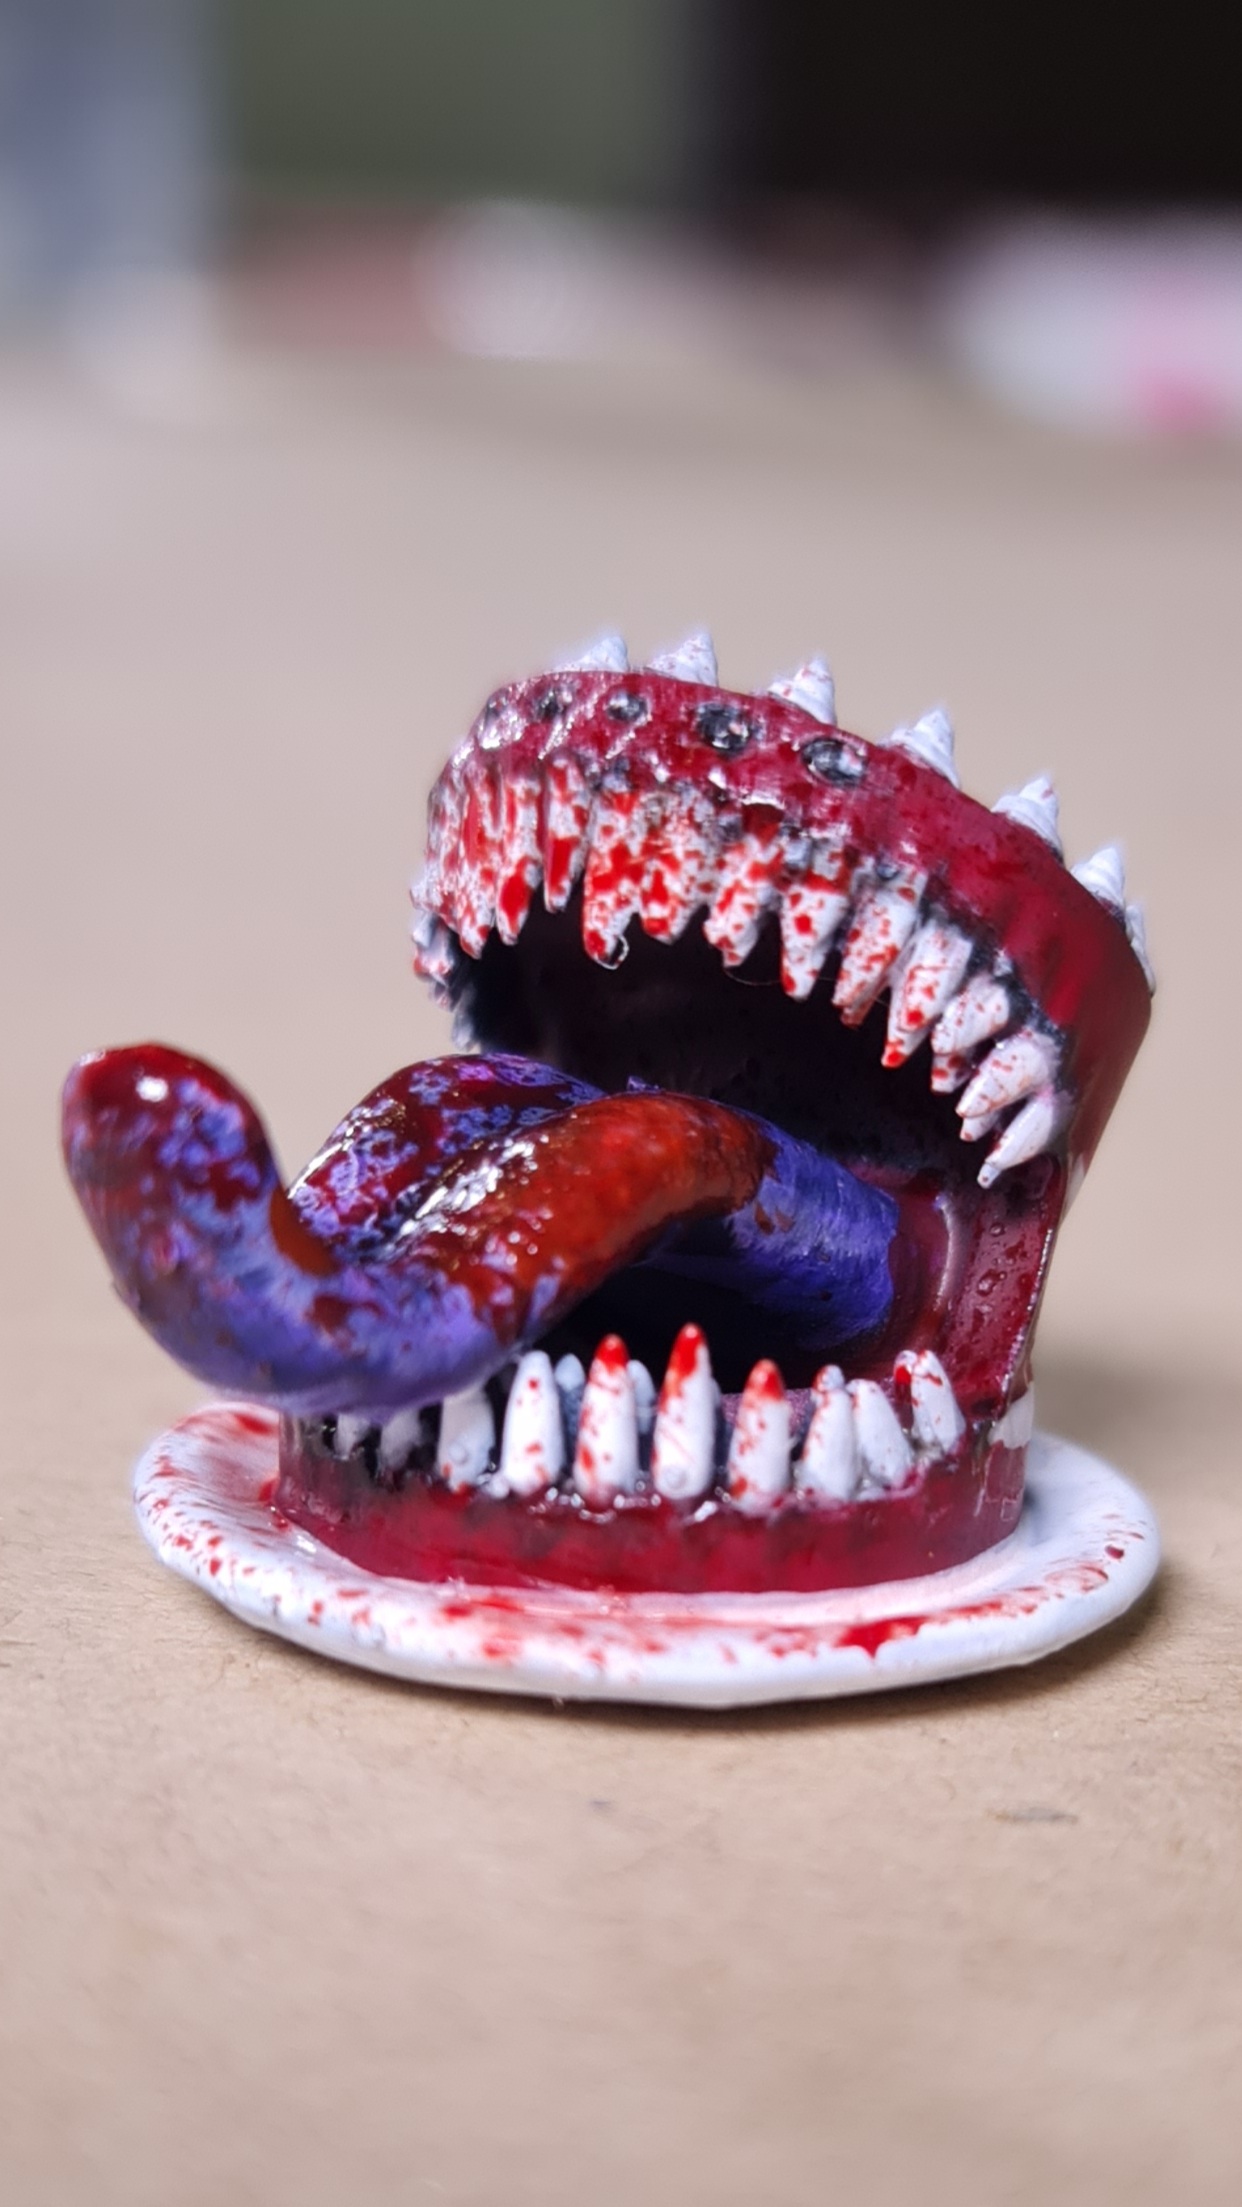 Birthday Cake Mimic - No Candles / Supported